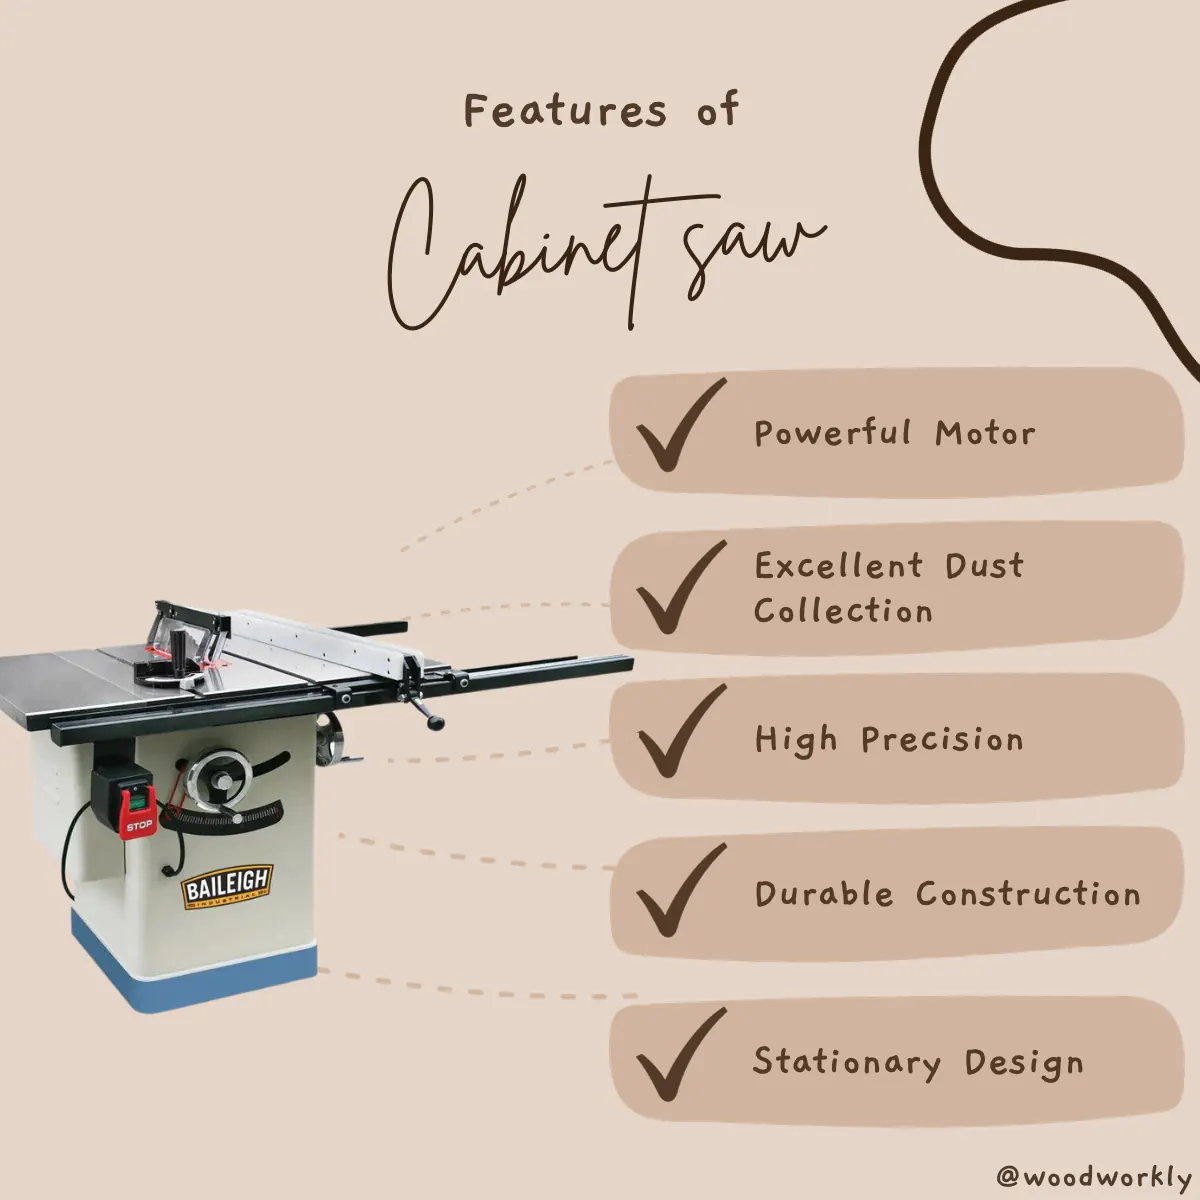 Features of Cabinet Saw